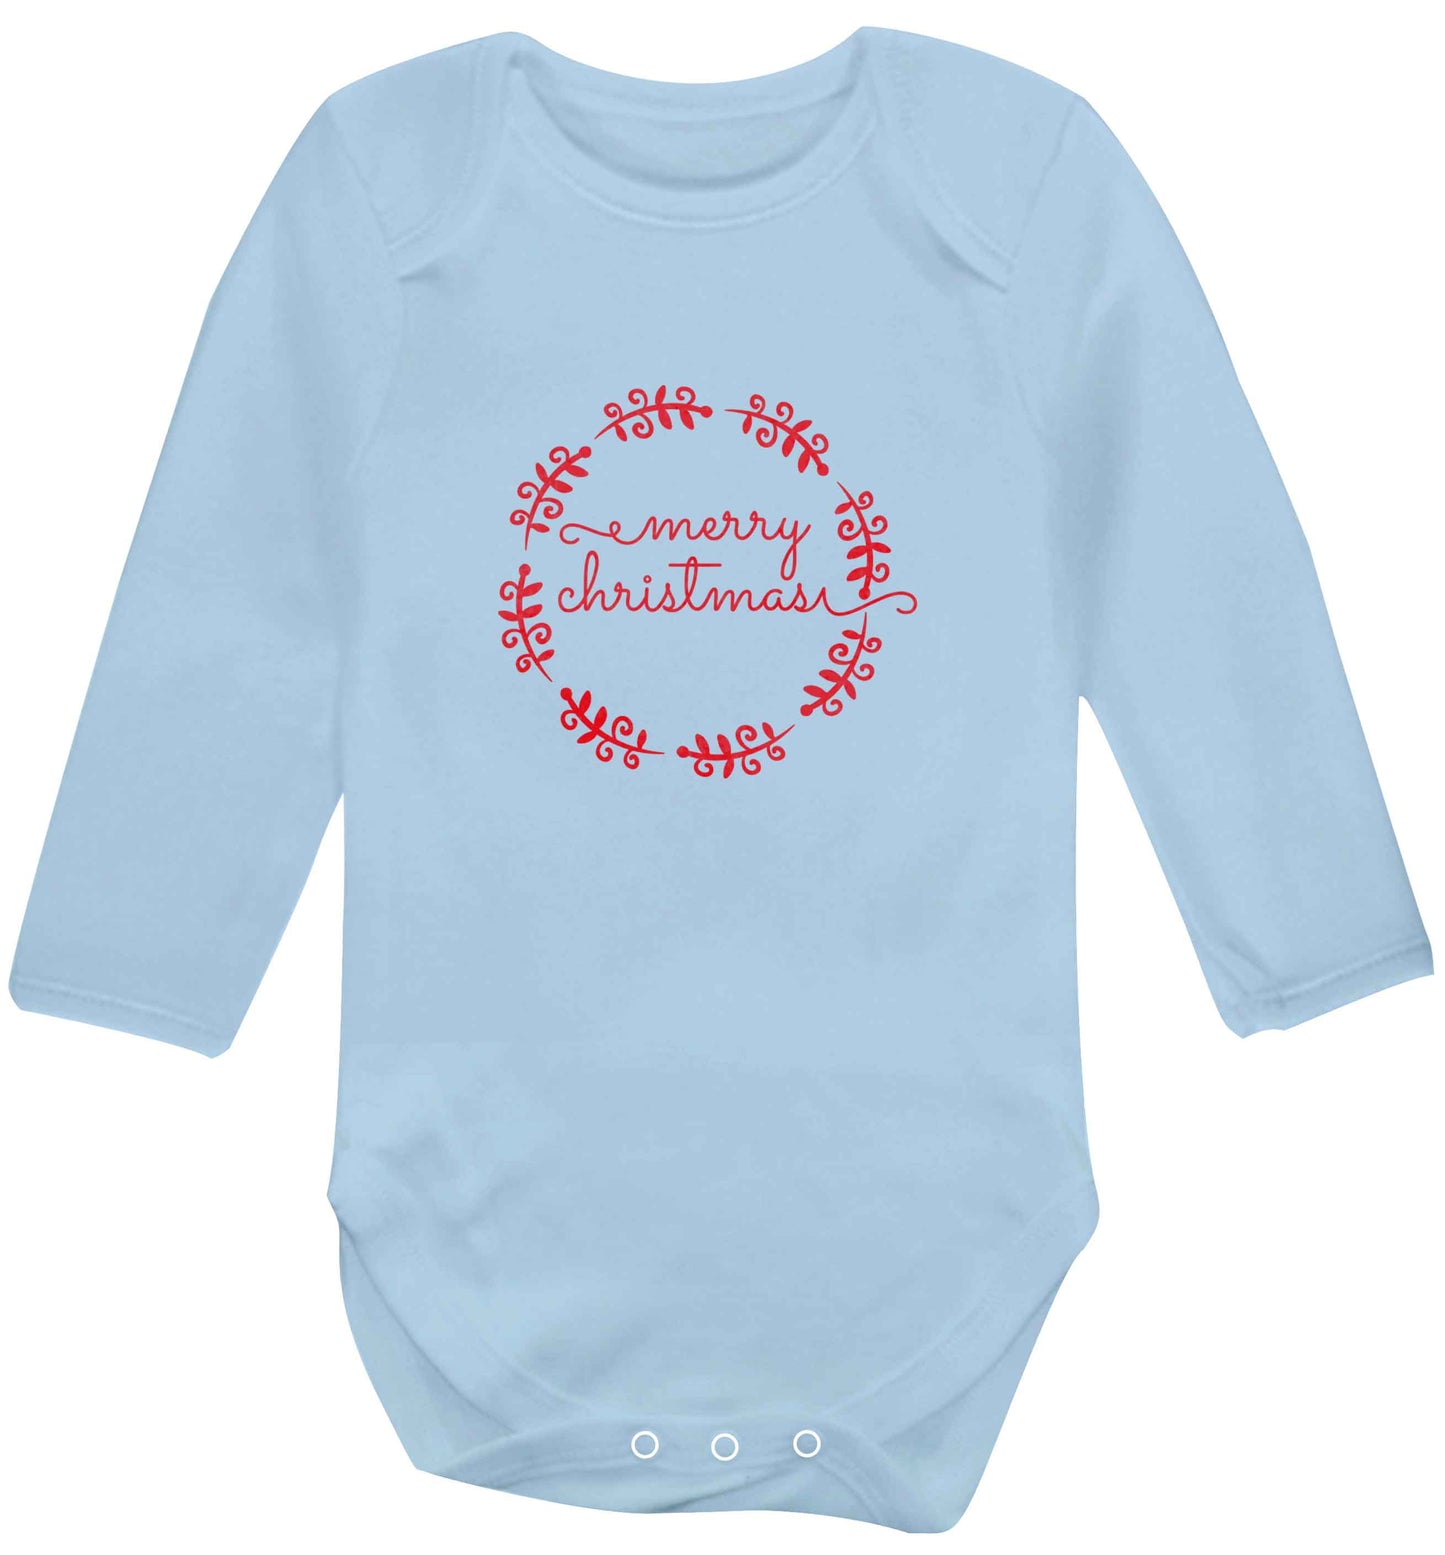 Merry christmas baby vest long sleeved pale blue 6-12 months